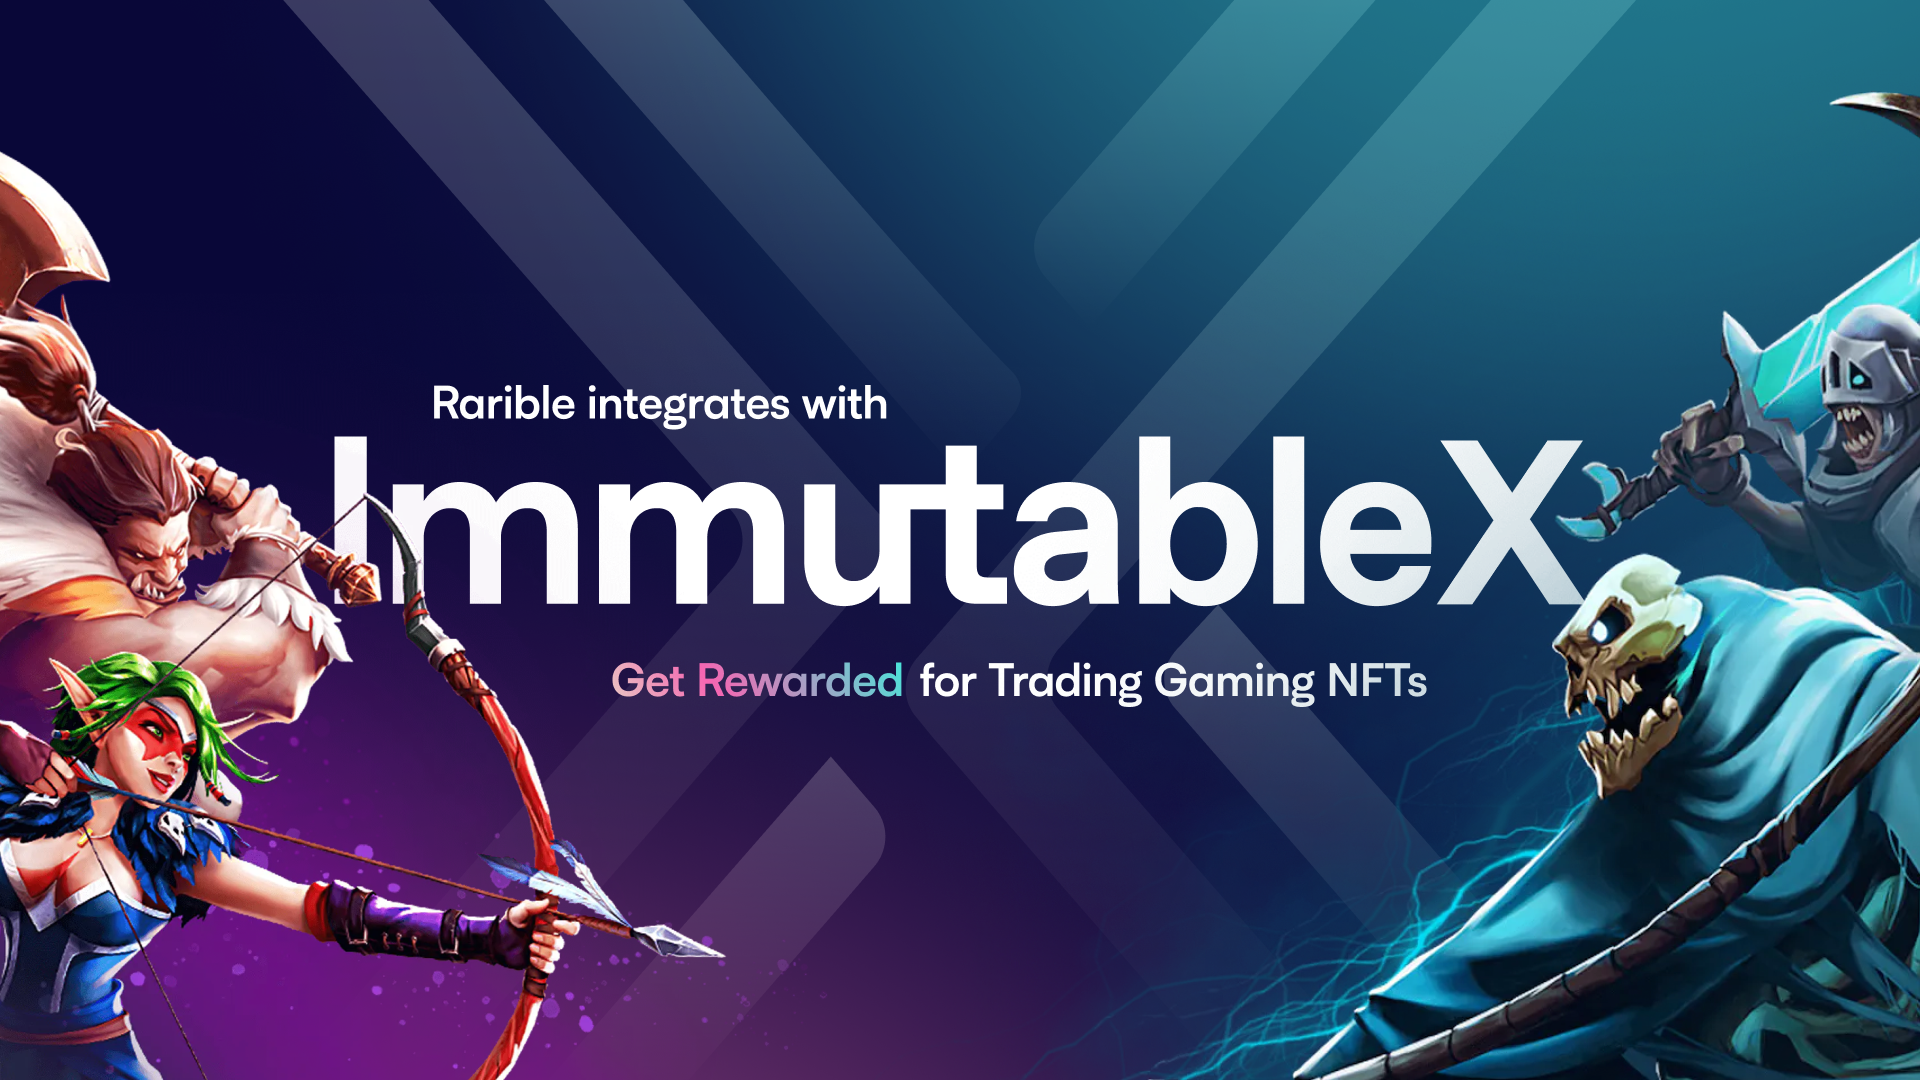 Rarible integrates with Immutable X. Get Rewarded for Trading Gaming NFTs!